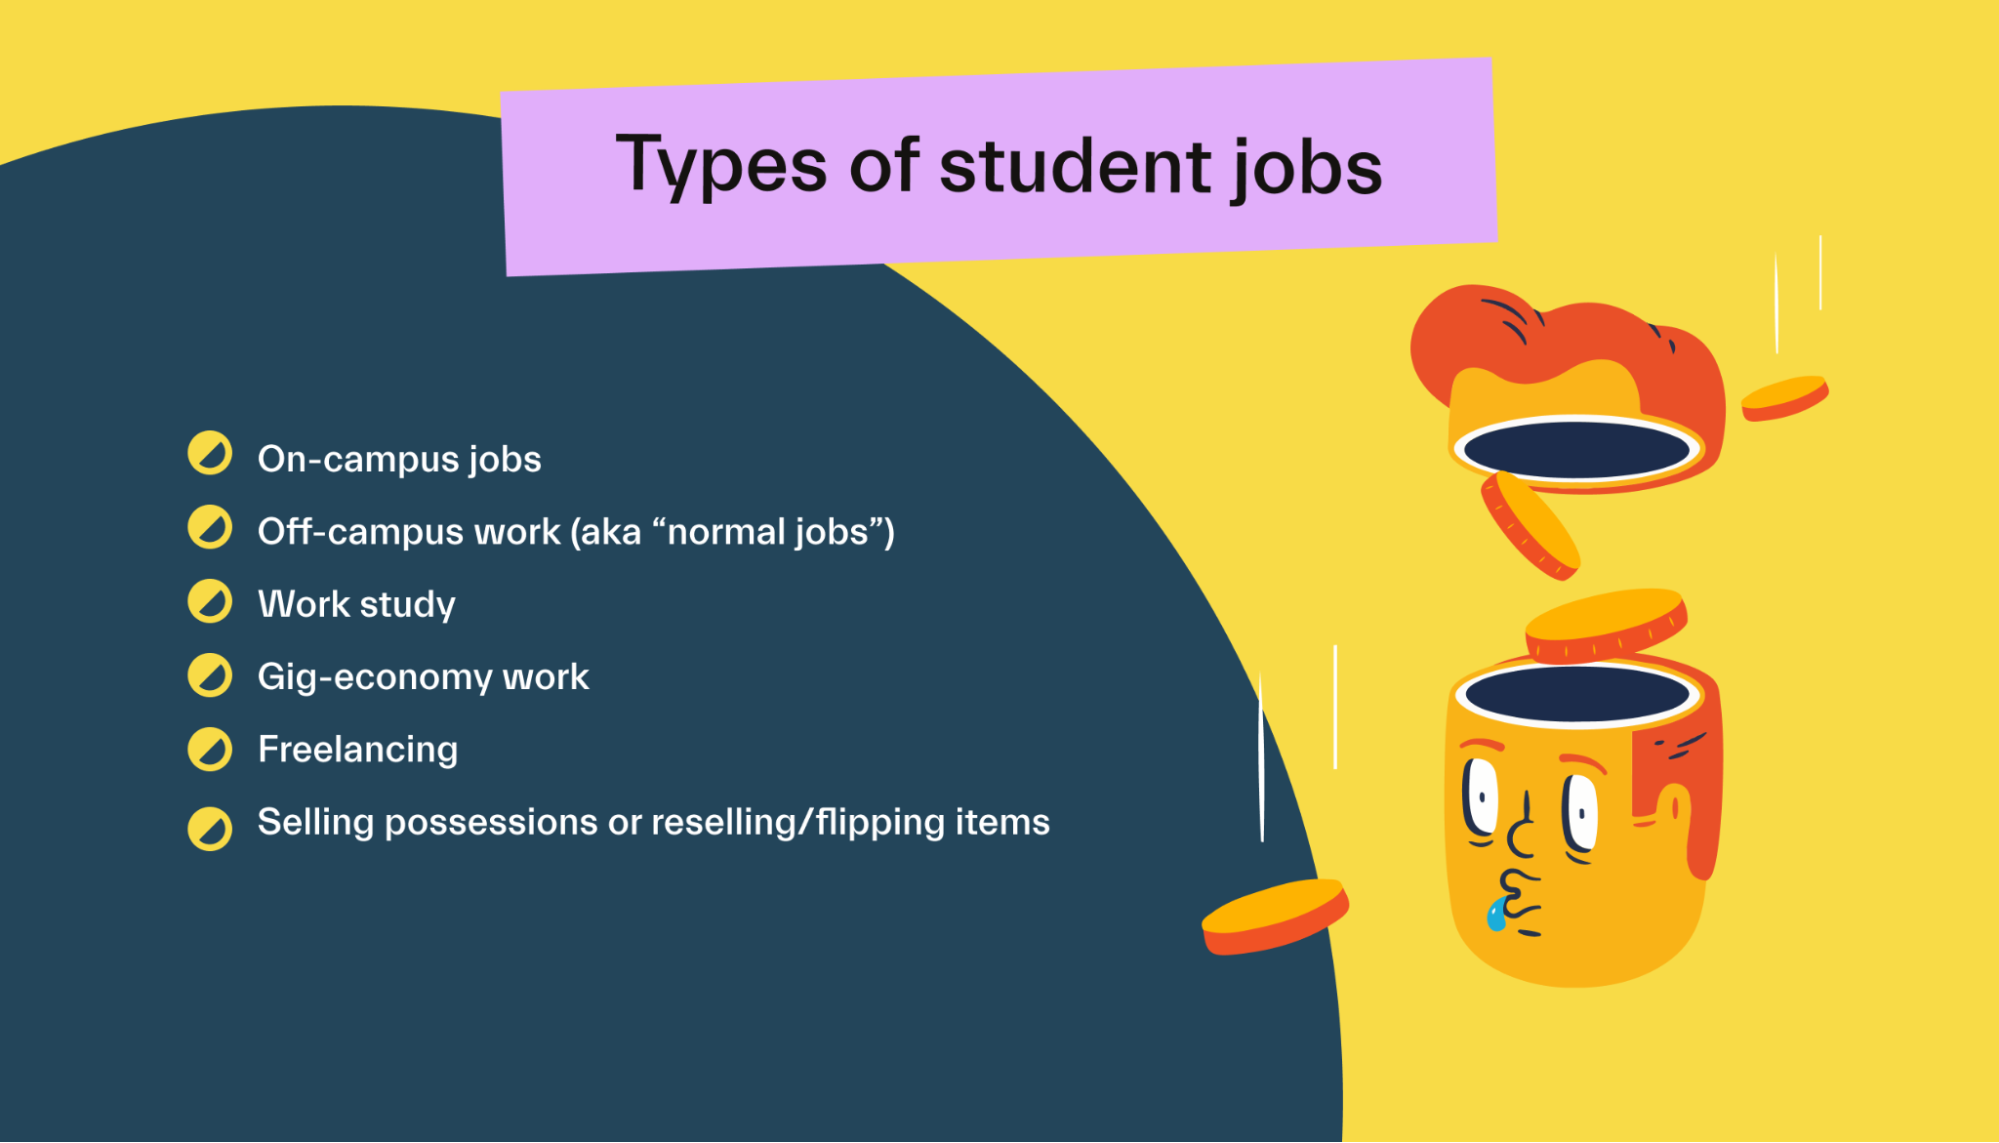 Types of student jobs